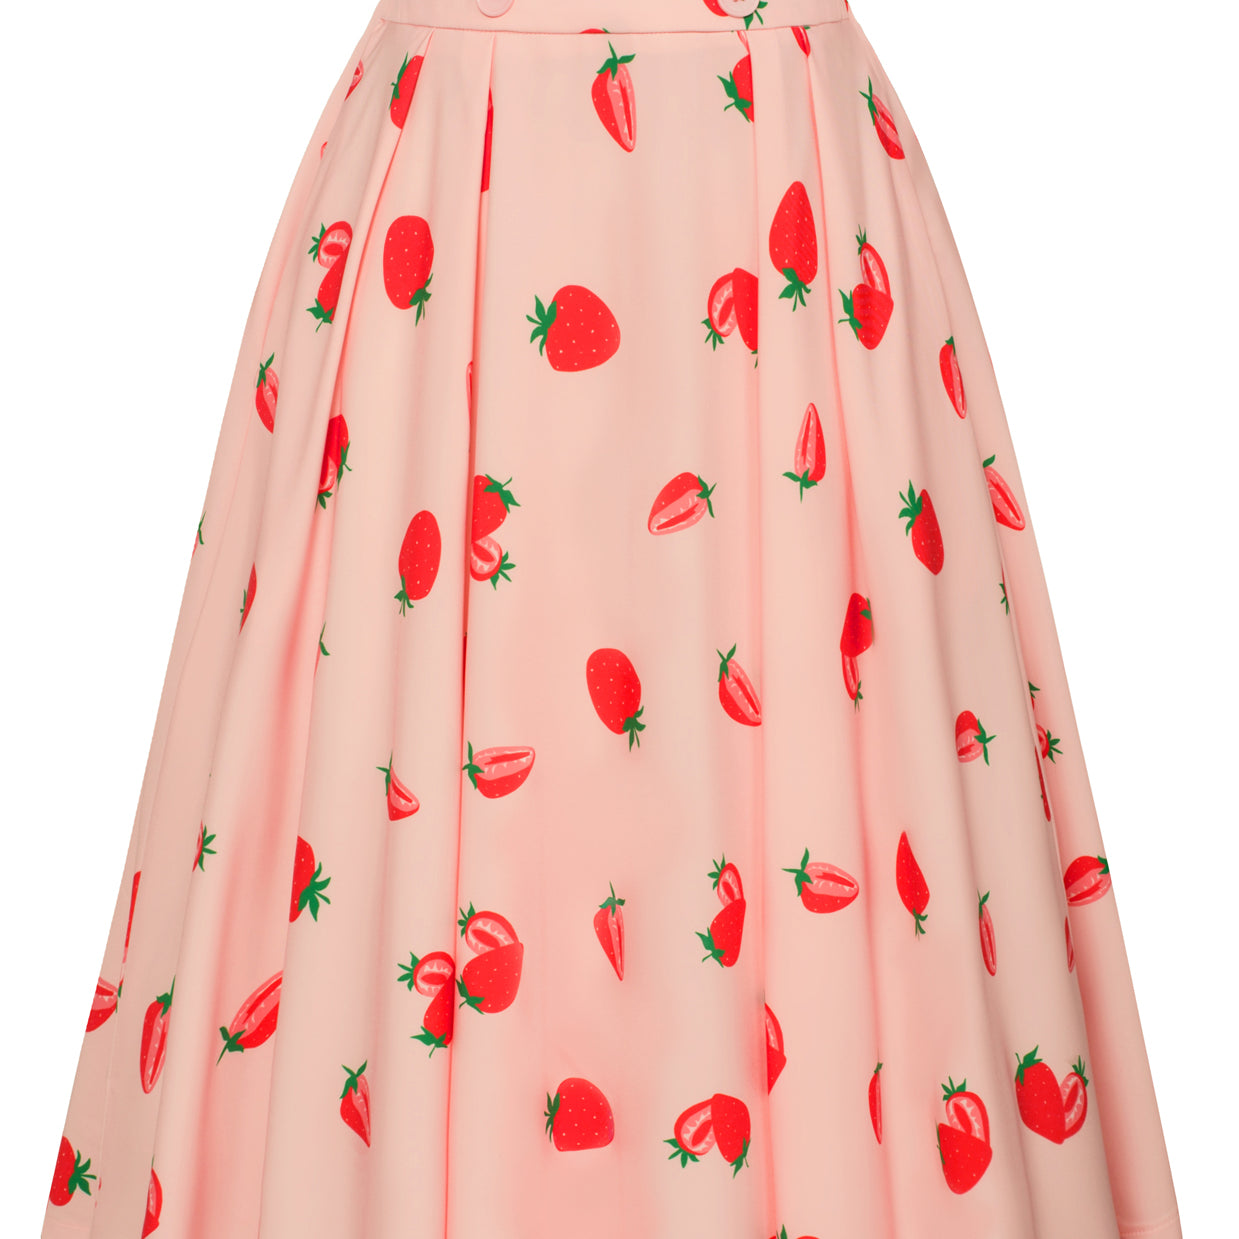 Pleated Buttons Decorated Elastic Waist High Waist Swing A-Line Skirt with Pockets